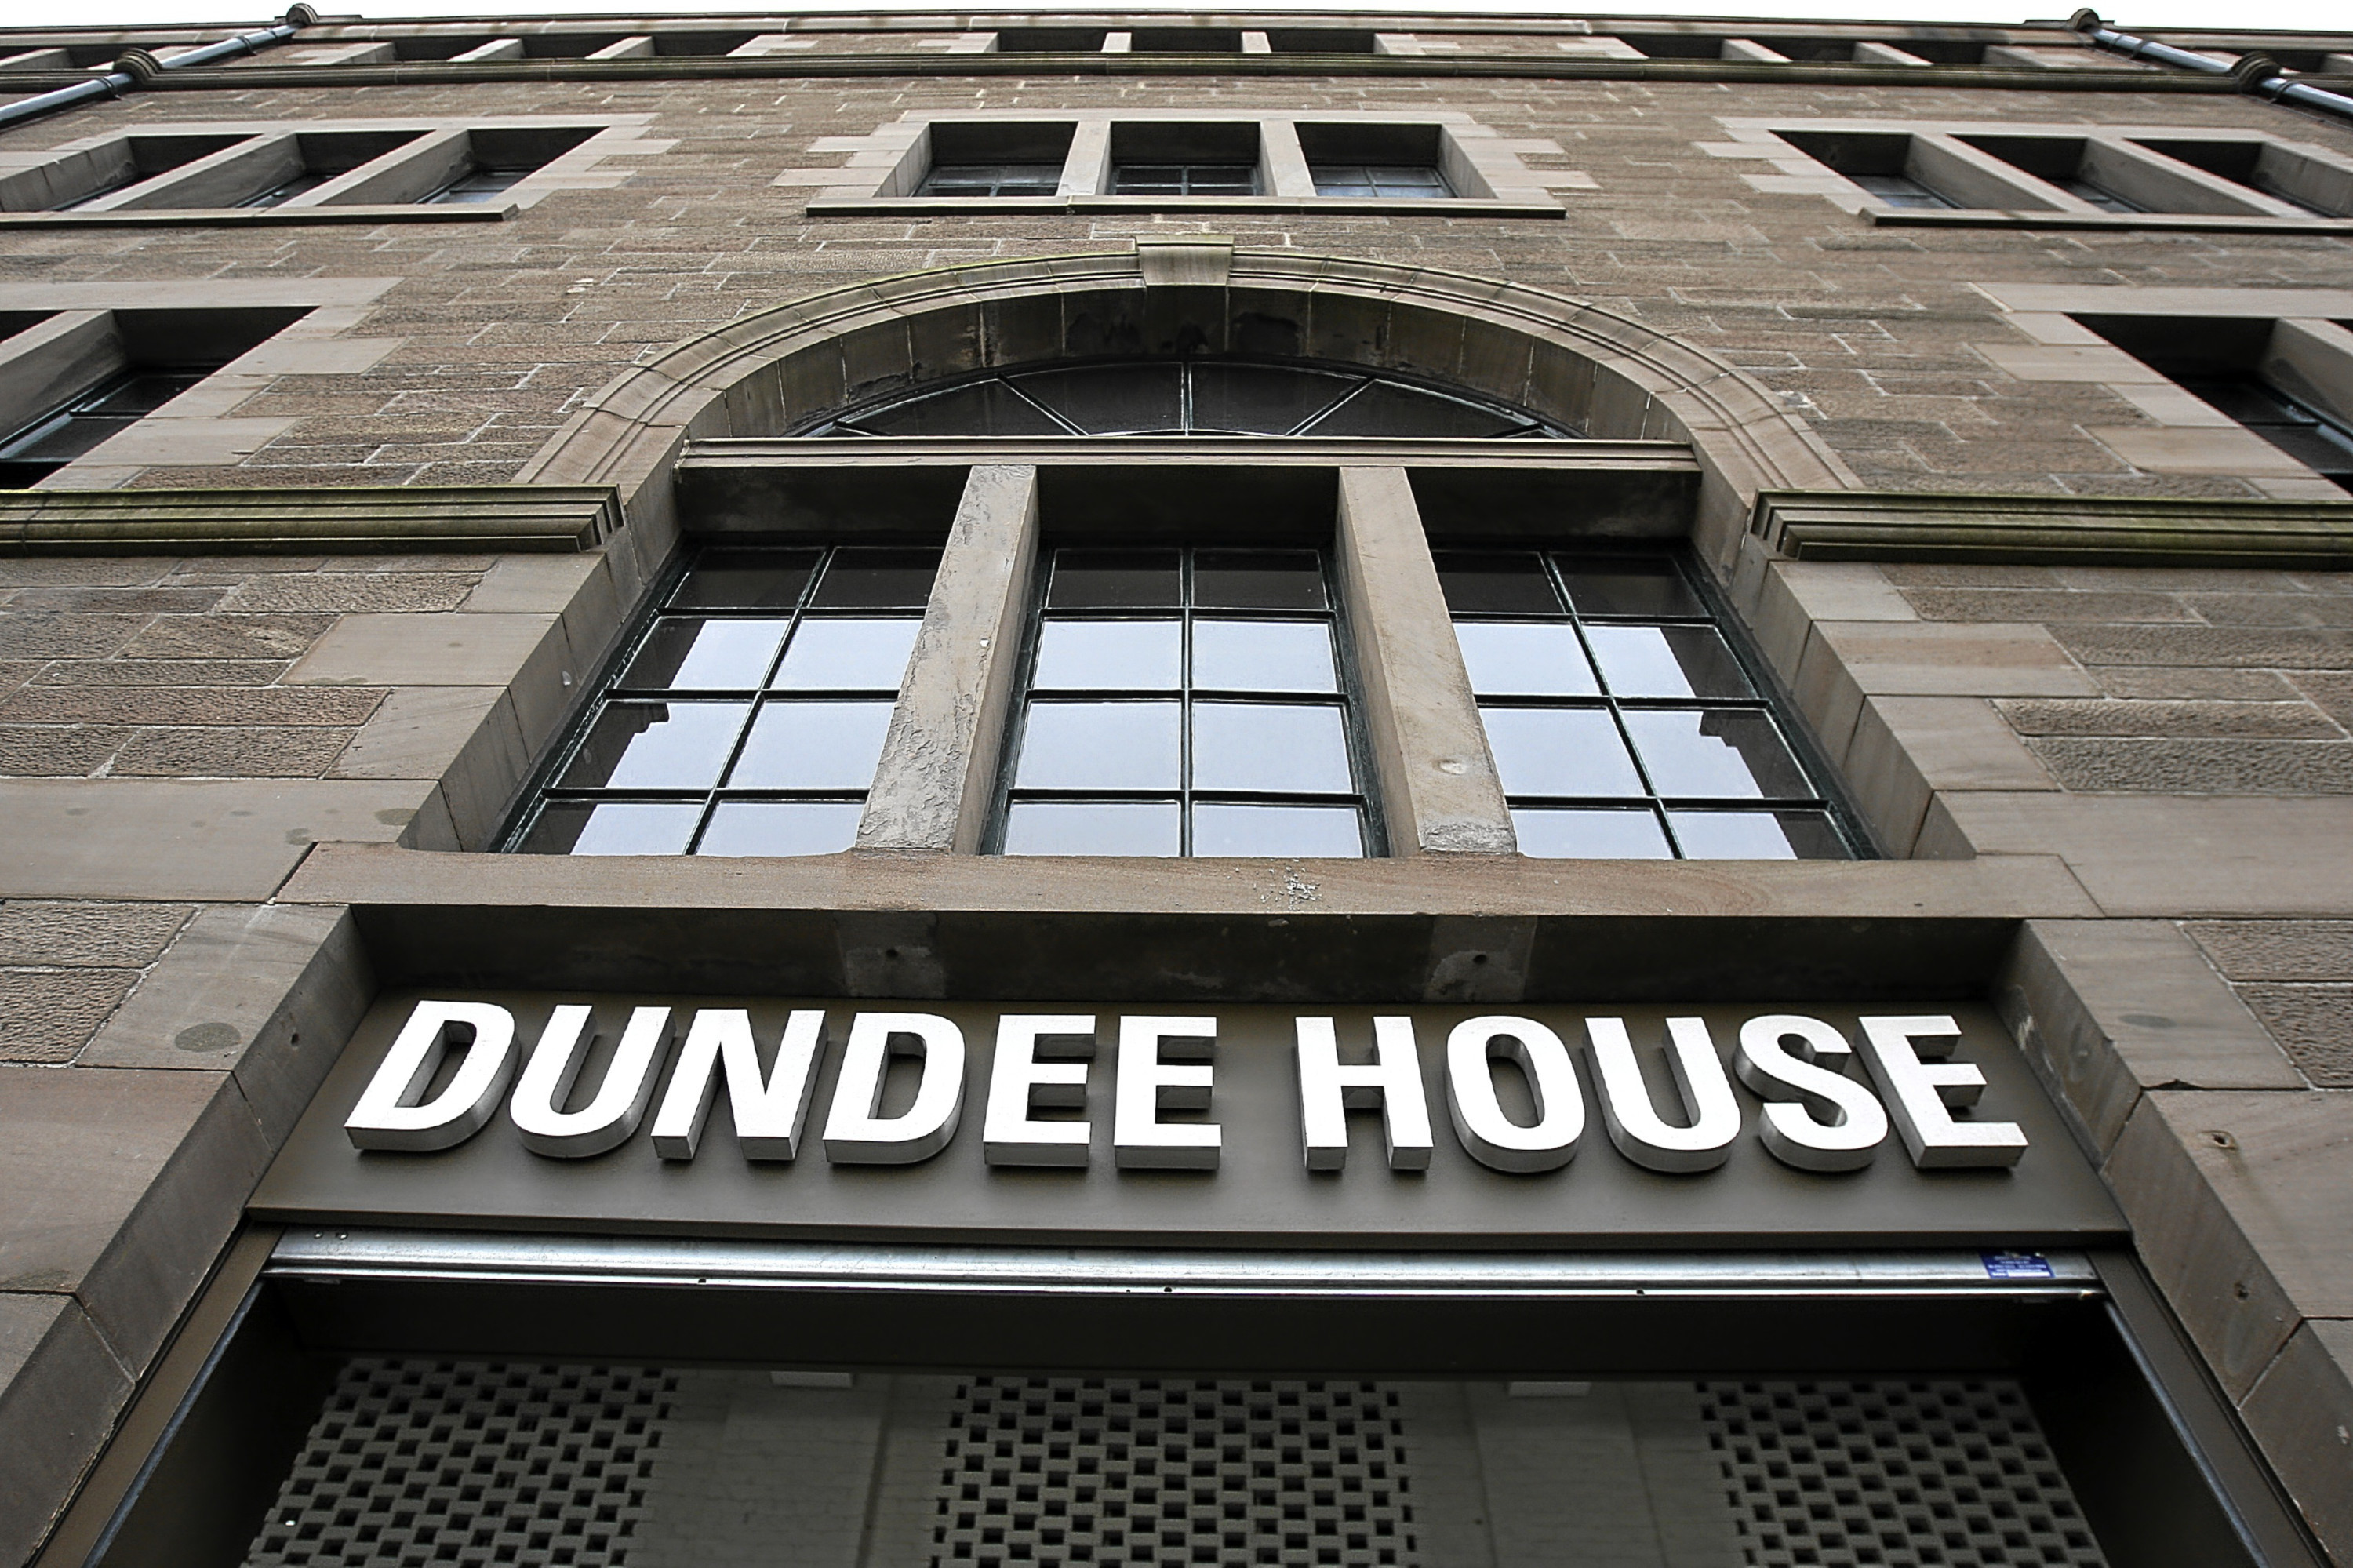 The proposal is under consideration by Dundee City Council.